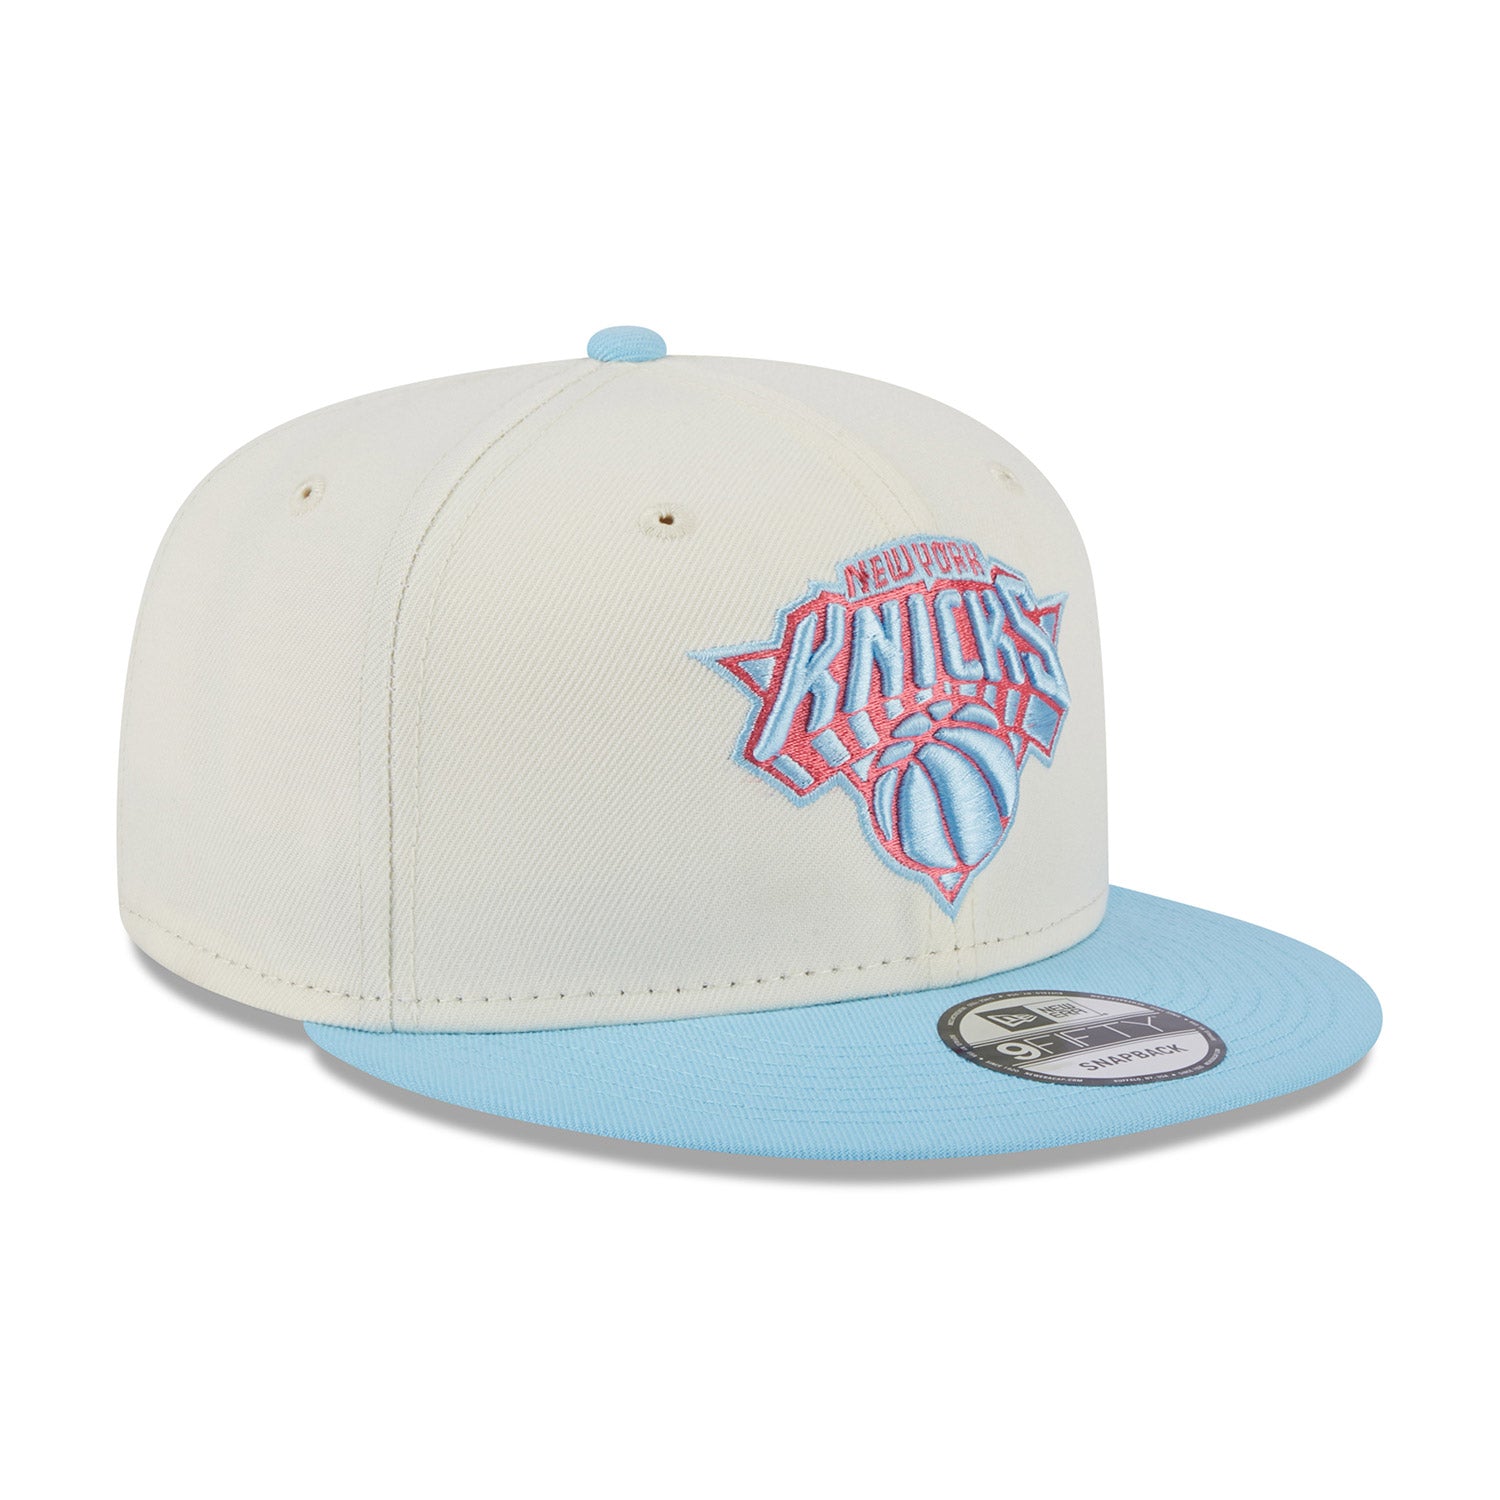 New Era Knicks Colorpack Two Tone Snapback Chrome/Light Blue Hat In White & Blue - Angled Right Side View